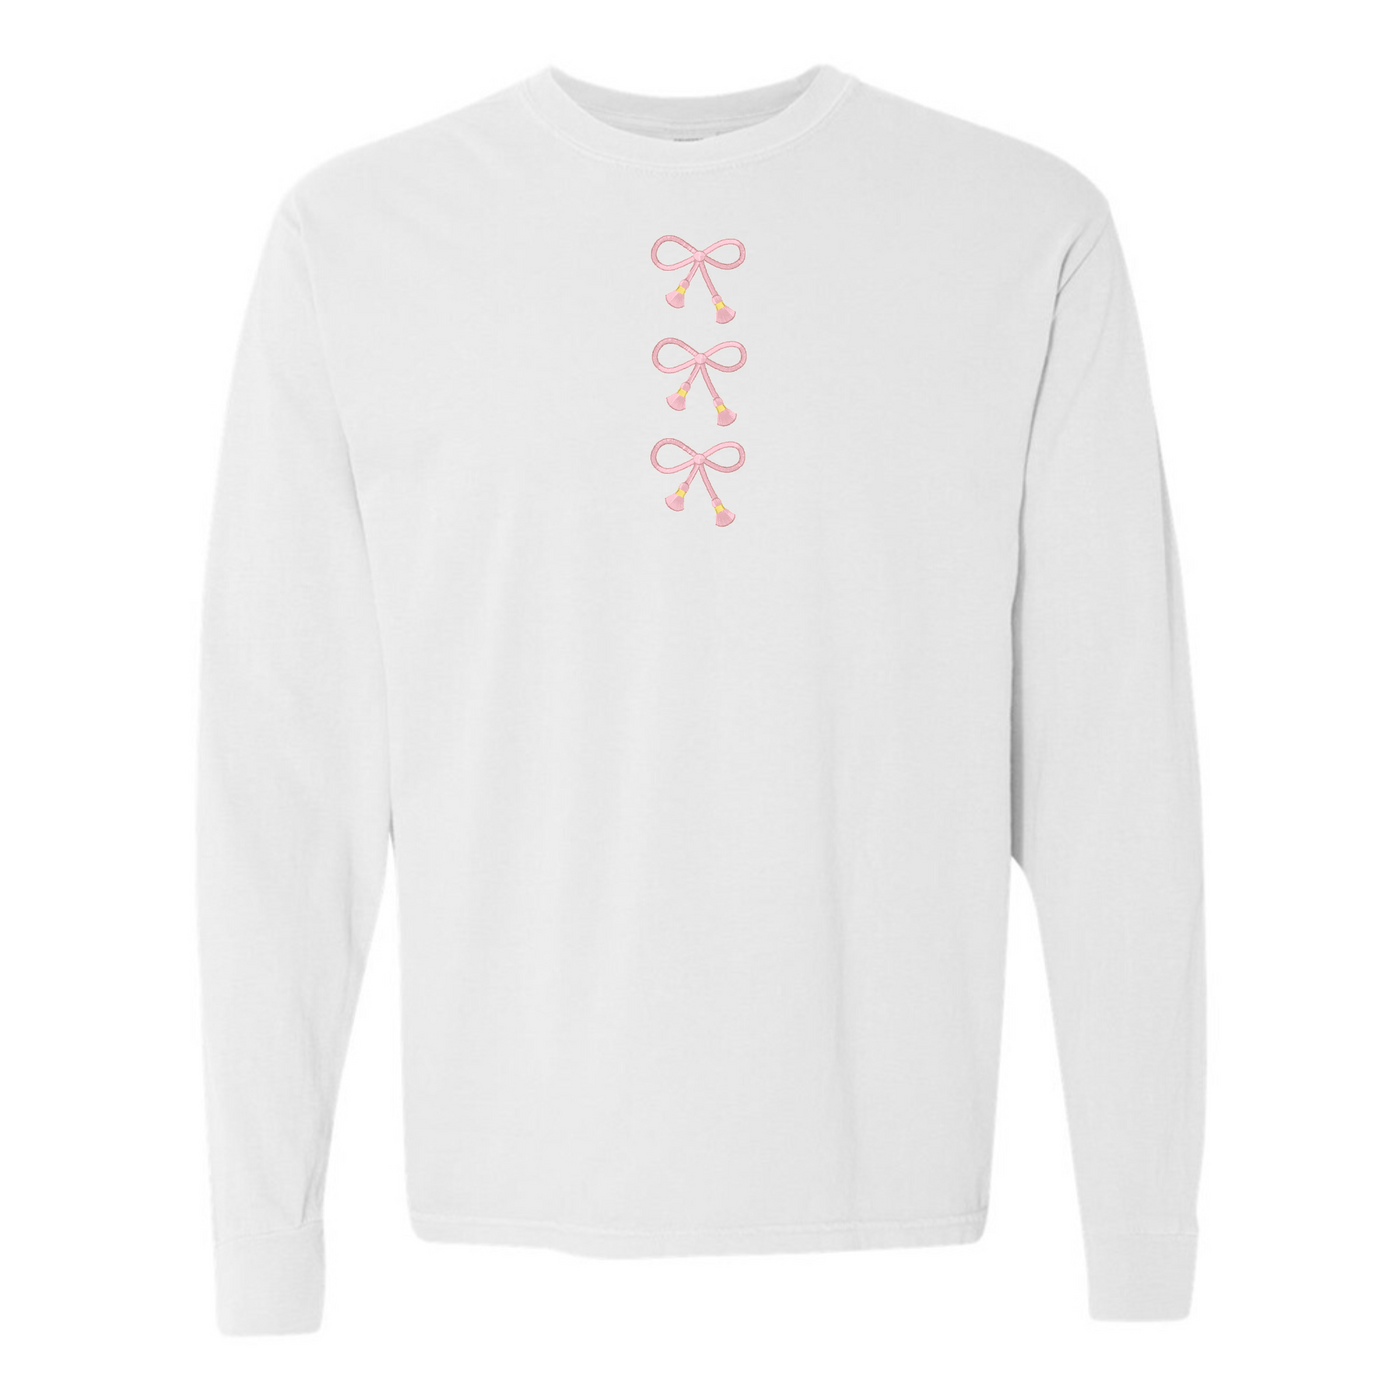 Embroidered Tasseled 'Bows' Long Sleeve